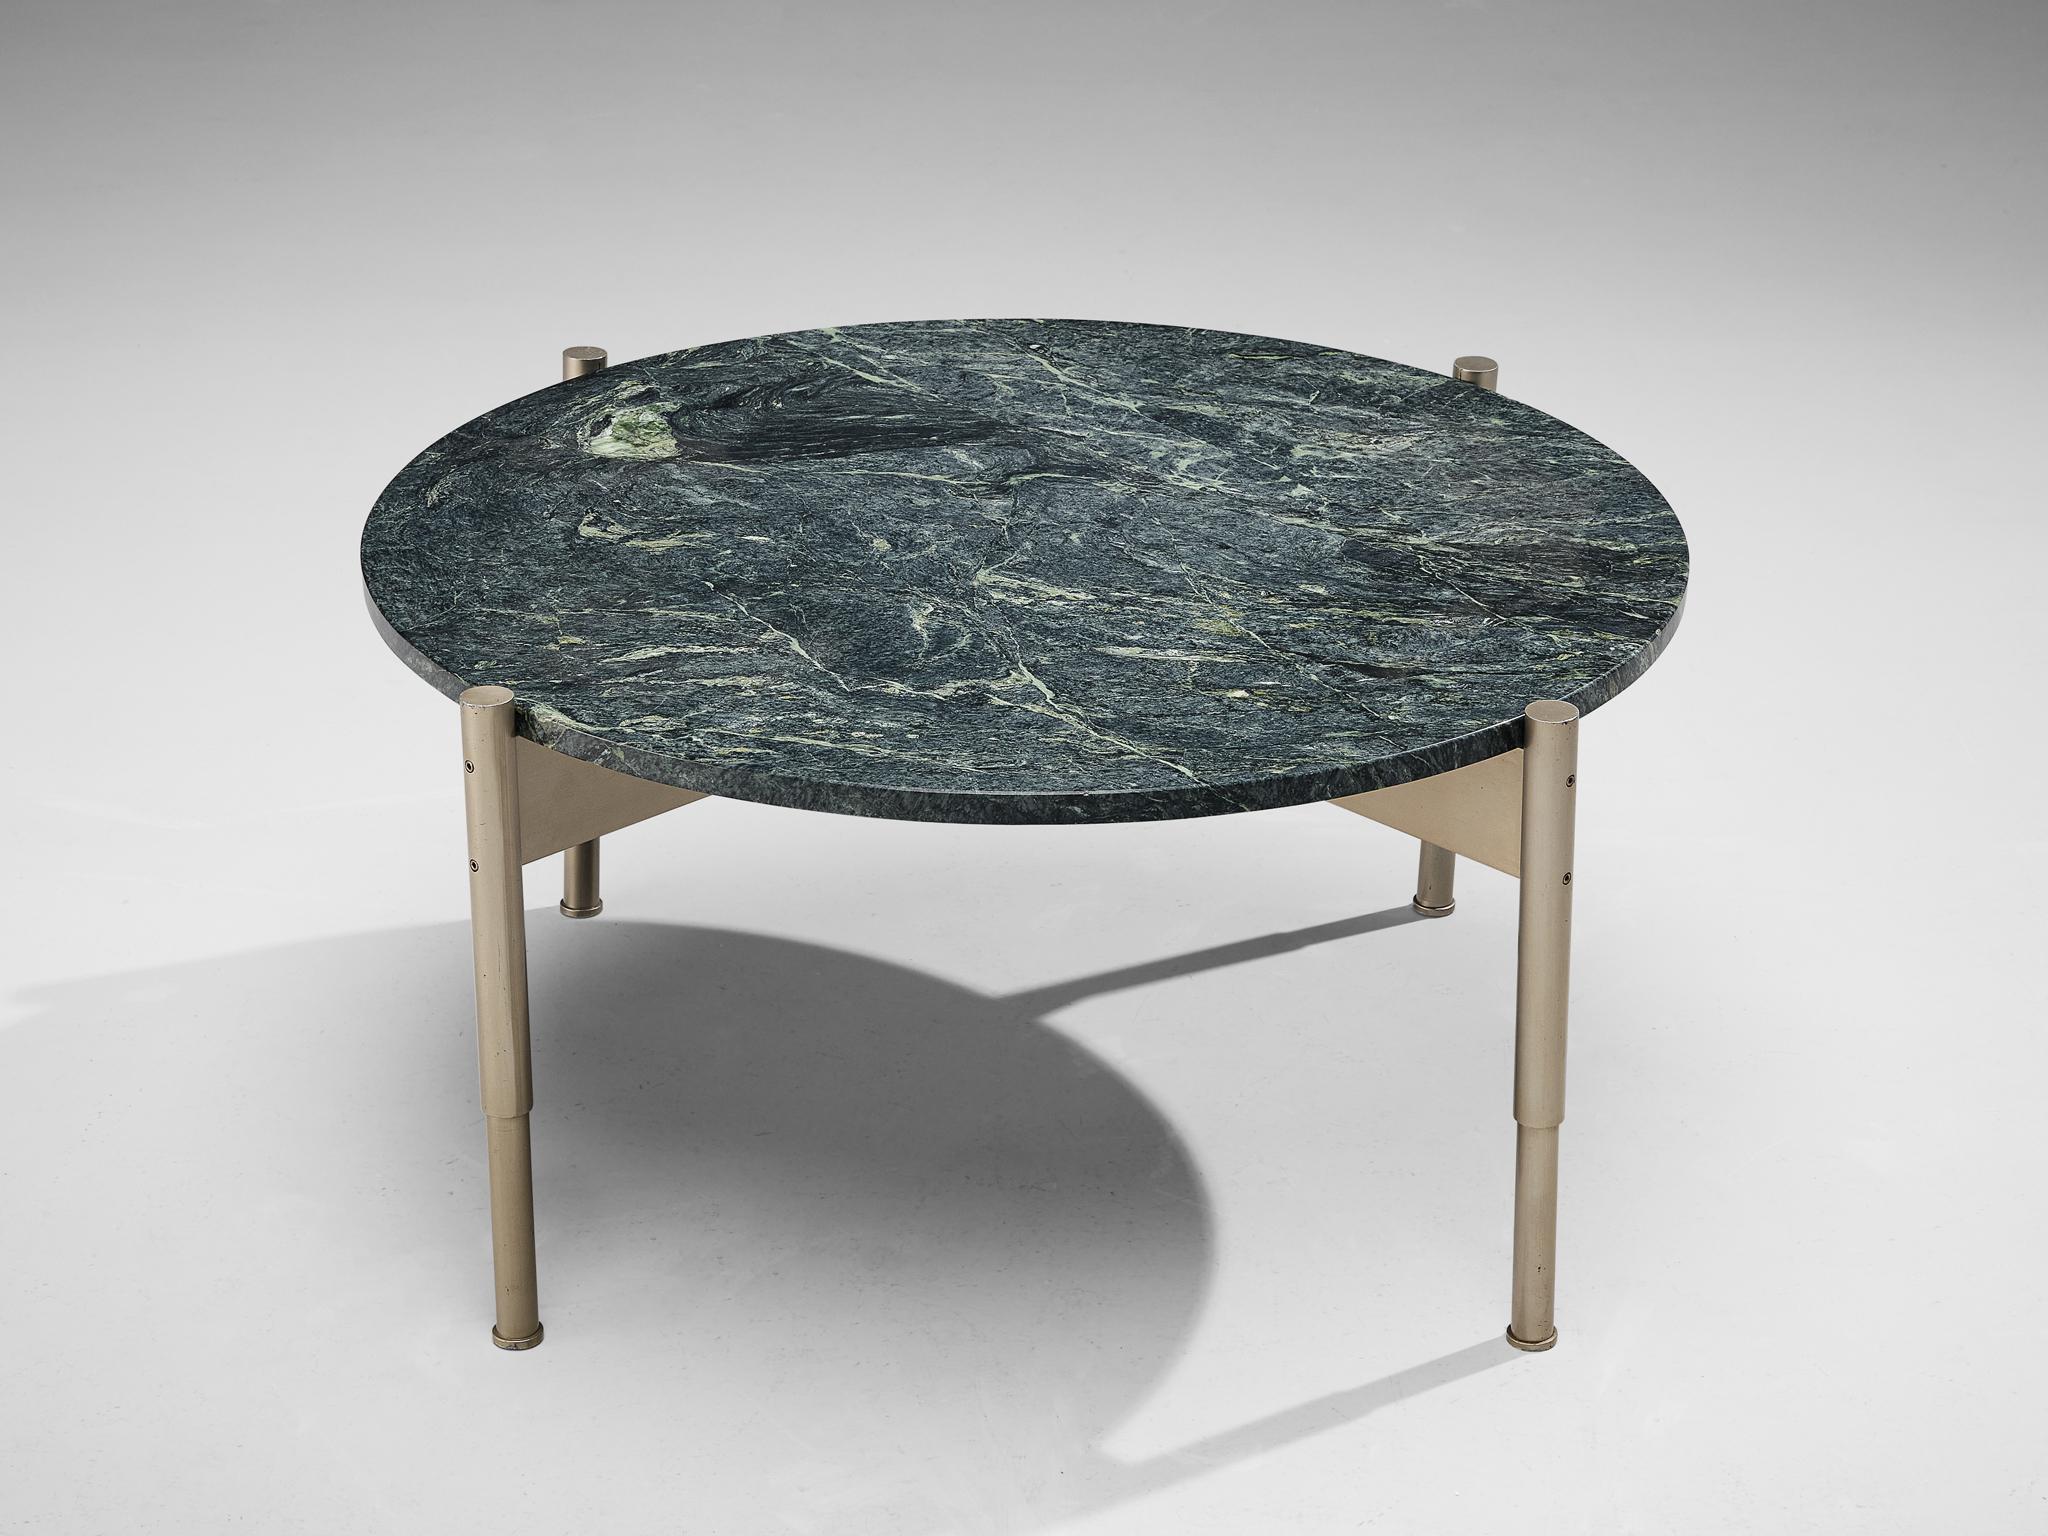 Gio Ponti for Parco dei Principi Hotel in Rome, produced by Cassina, coffee table, green marble, anodised aluminum, Italy, 1961-1964

The provenance of this coffee table is notably intriguing, as it originates from the Parco dei Principi Hotel in